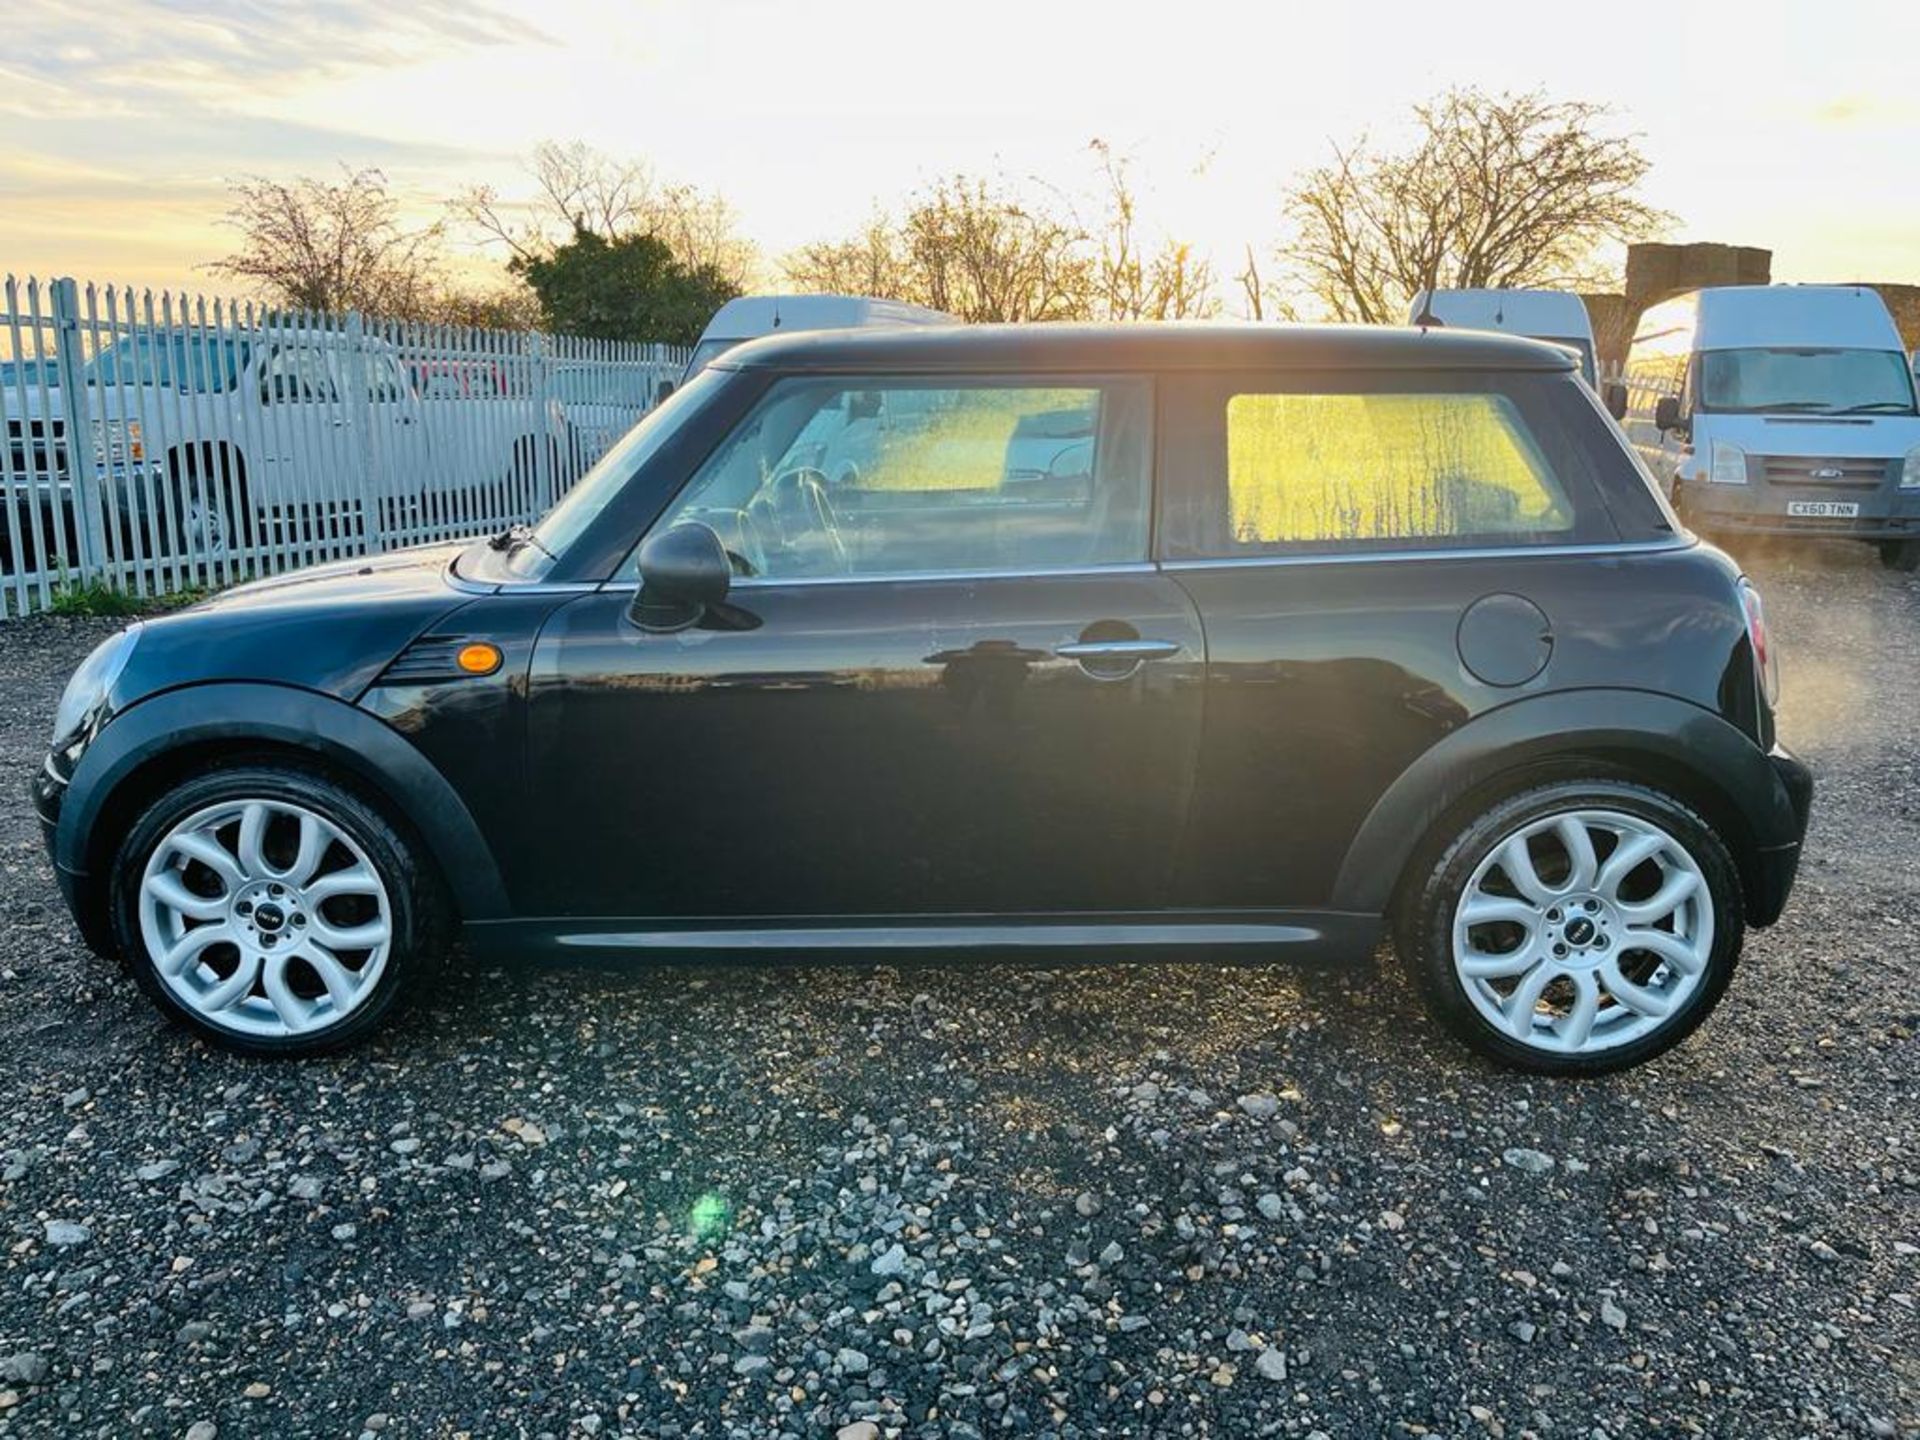 Mini One 1.6 Start/Stop 100 2010 '10 Reg' ' Very Economical' Only 108,430 - Image 4 of 26